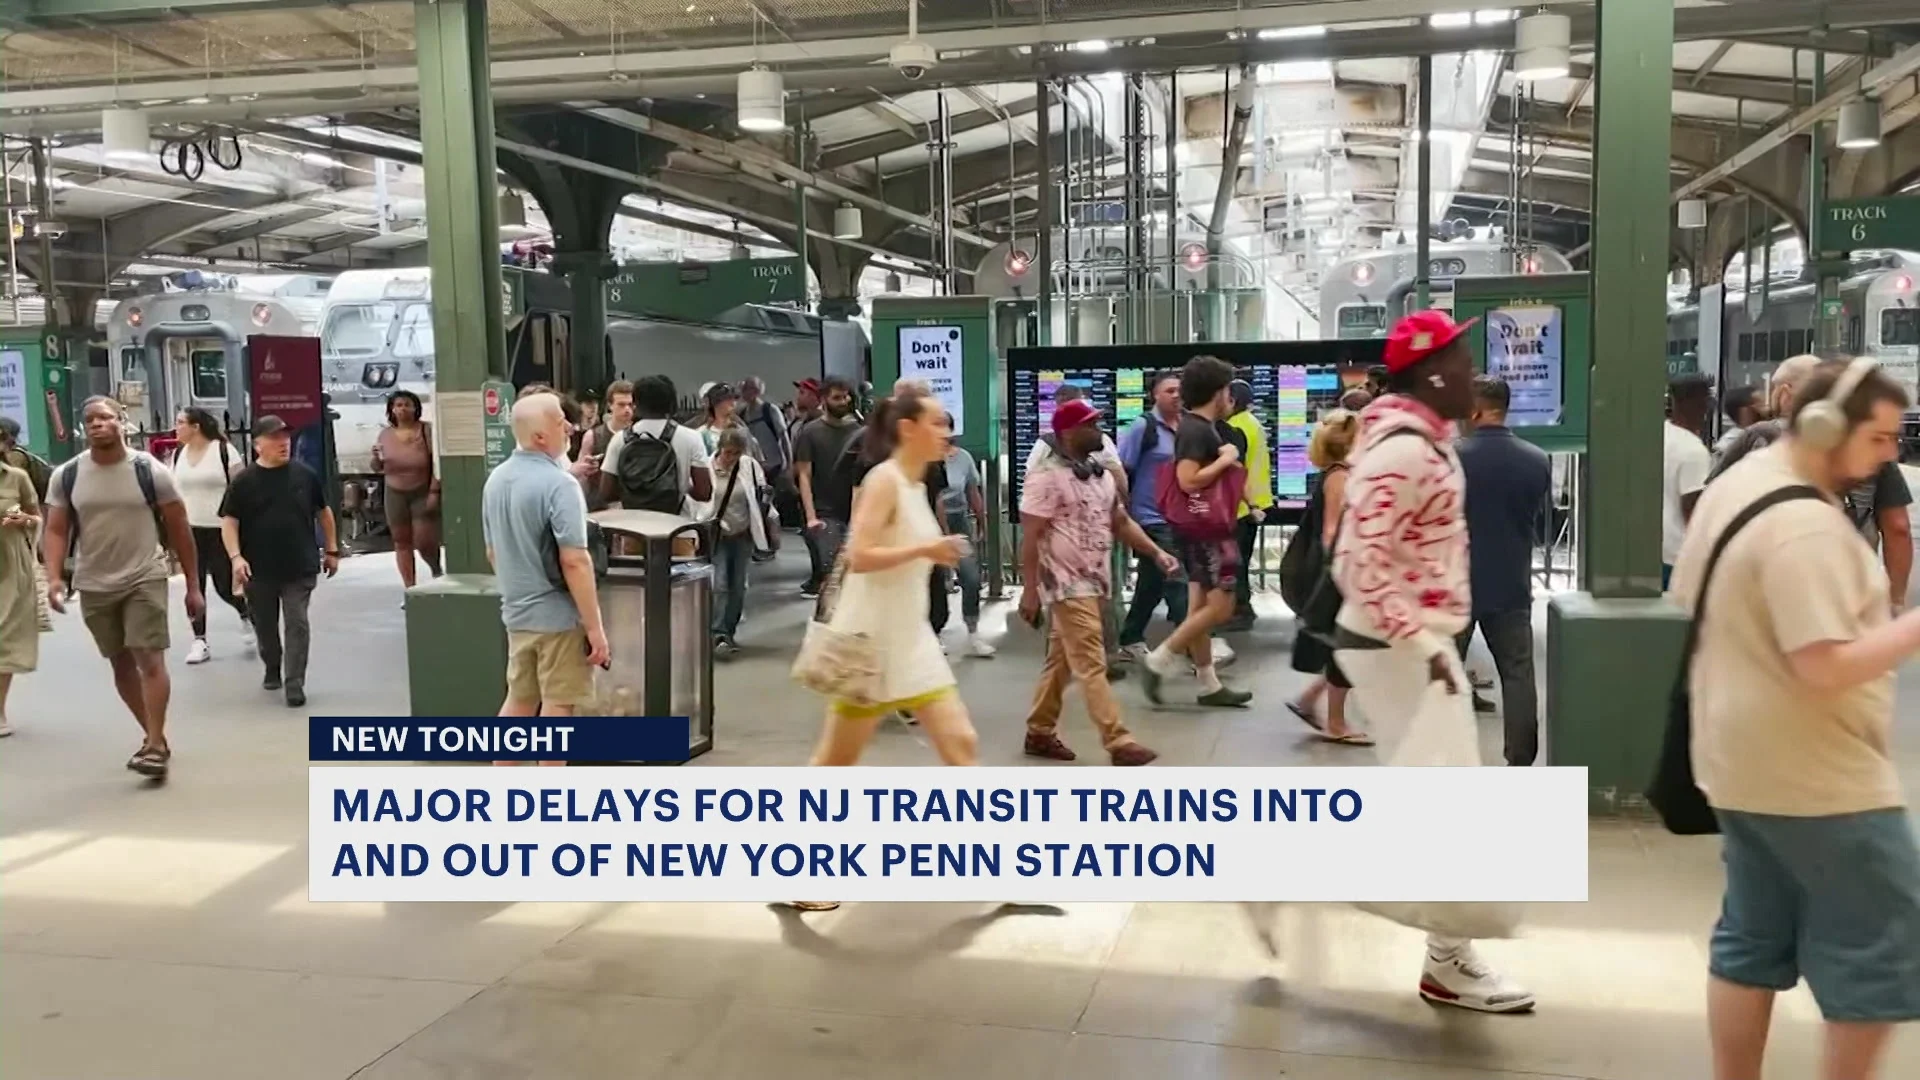 Amtrak, NJ Transit service resumes with ‘significant delays’ after power outage, overhead wire issues